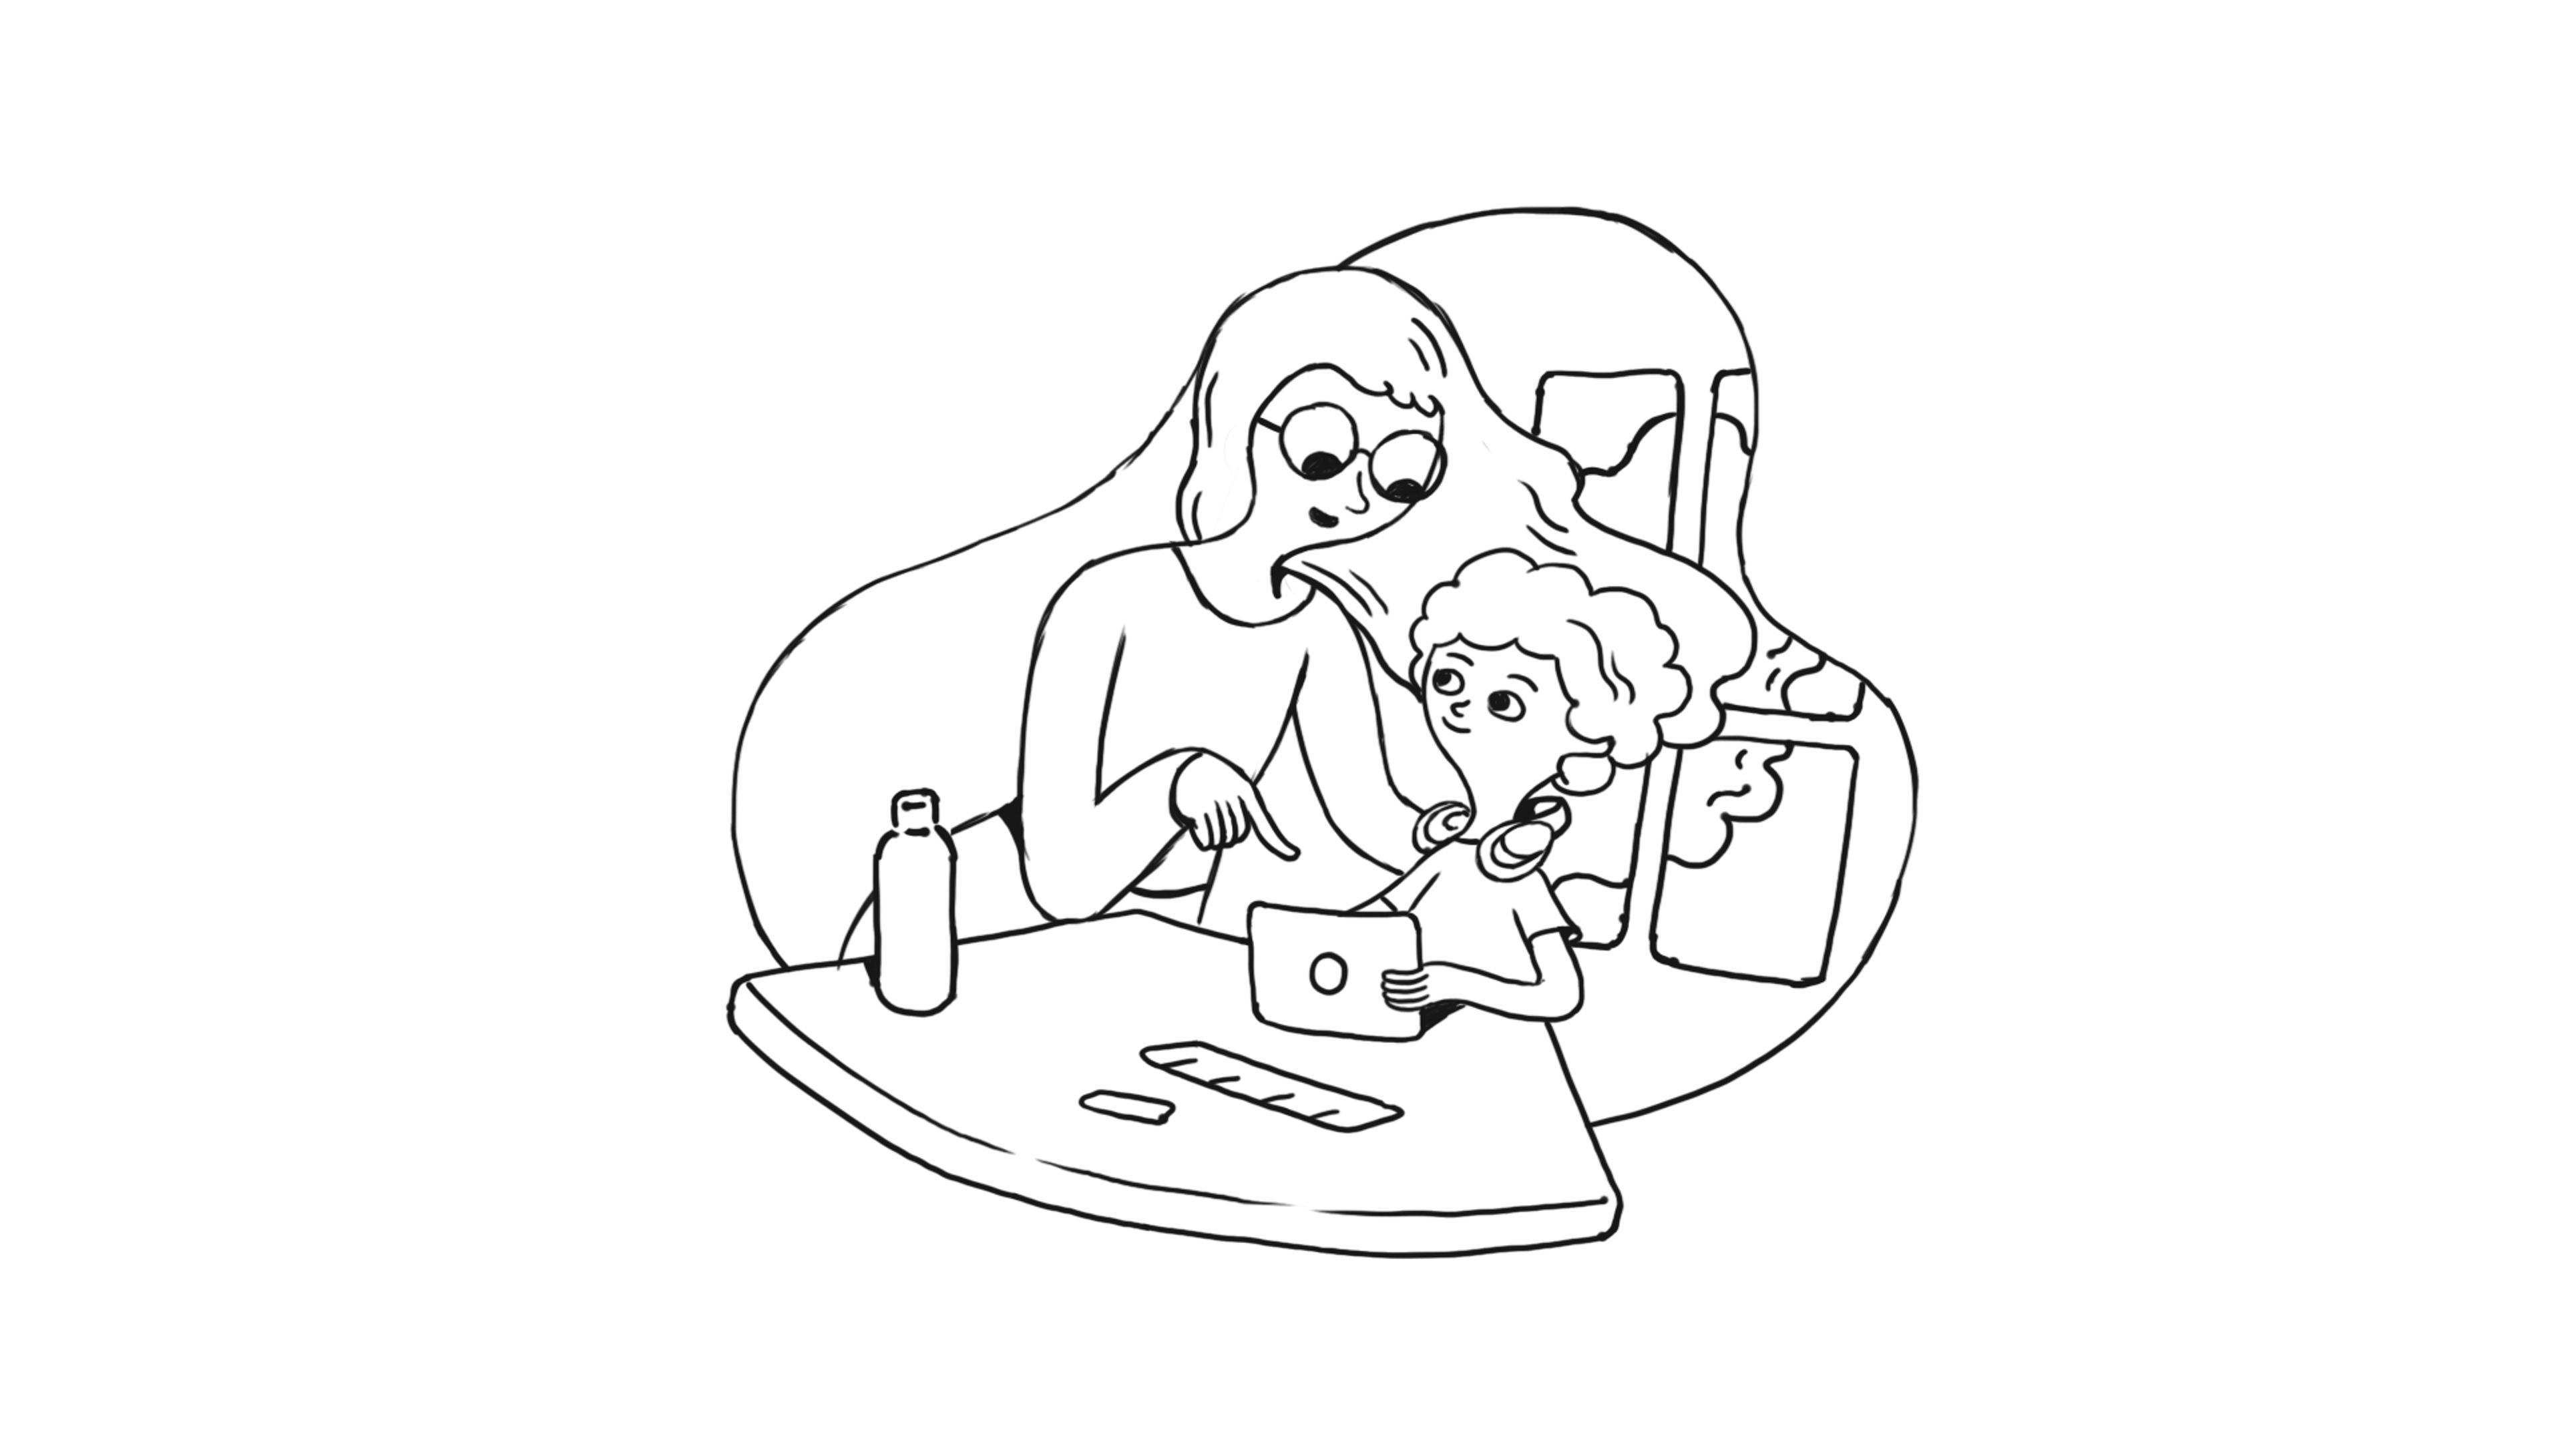 Nota sketch of adult helping a child